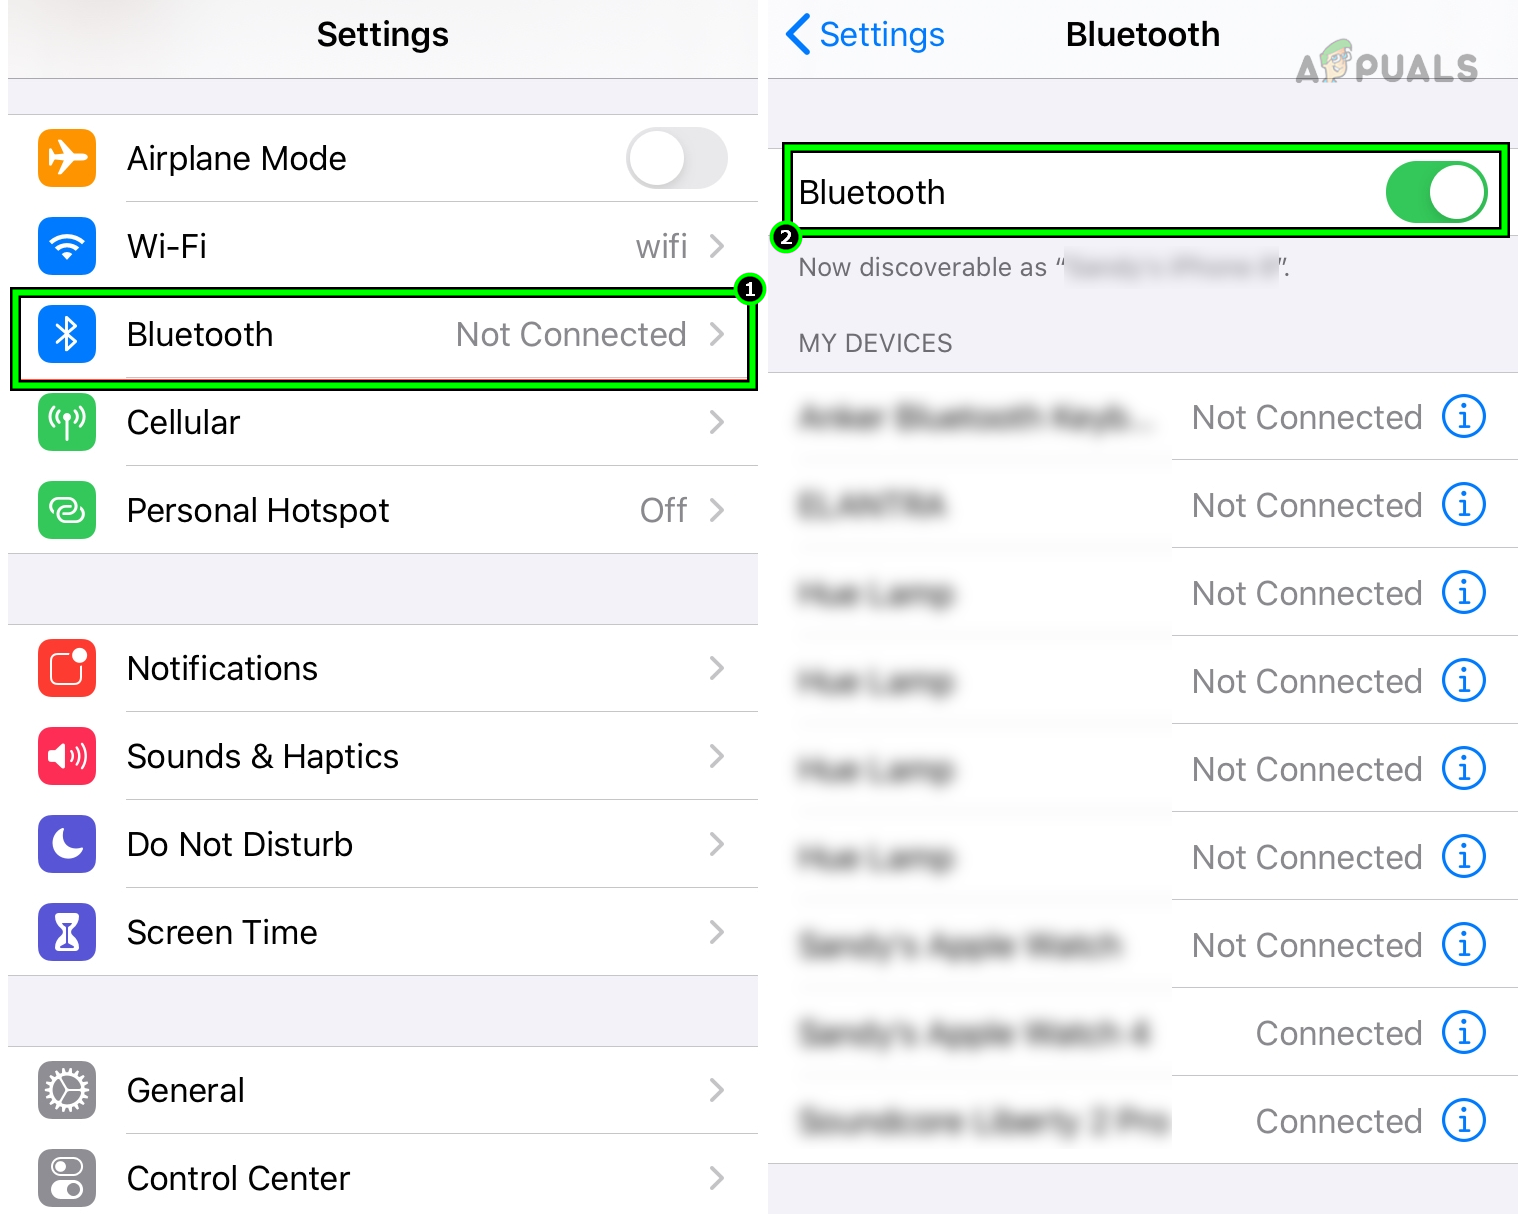 Disable Bluetooth in the iPhone Settings